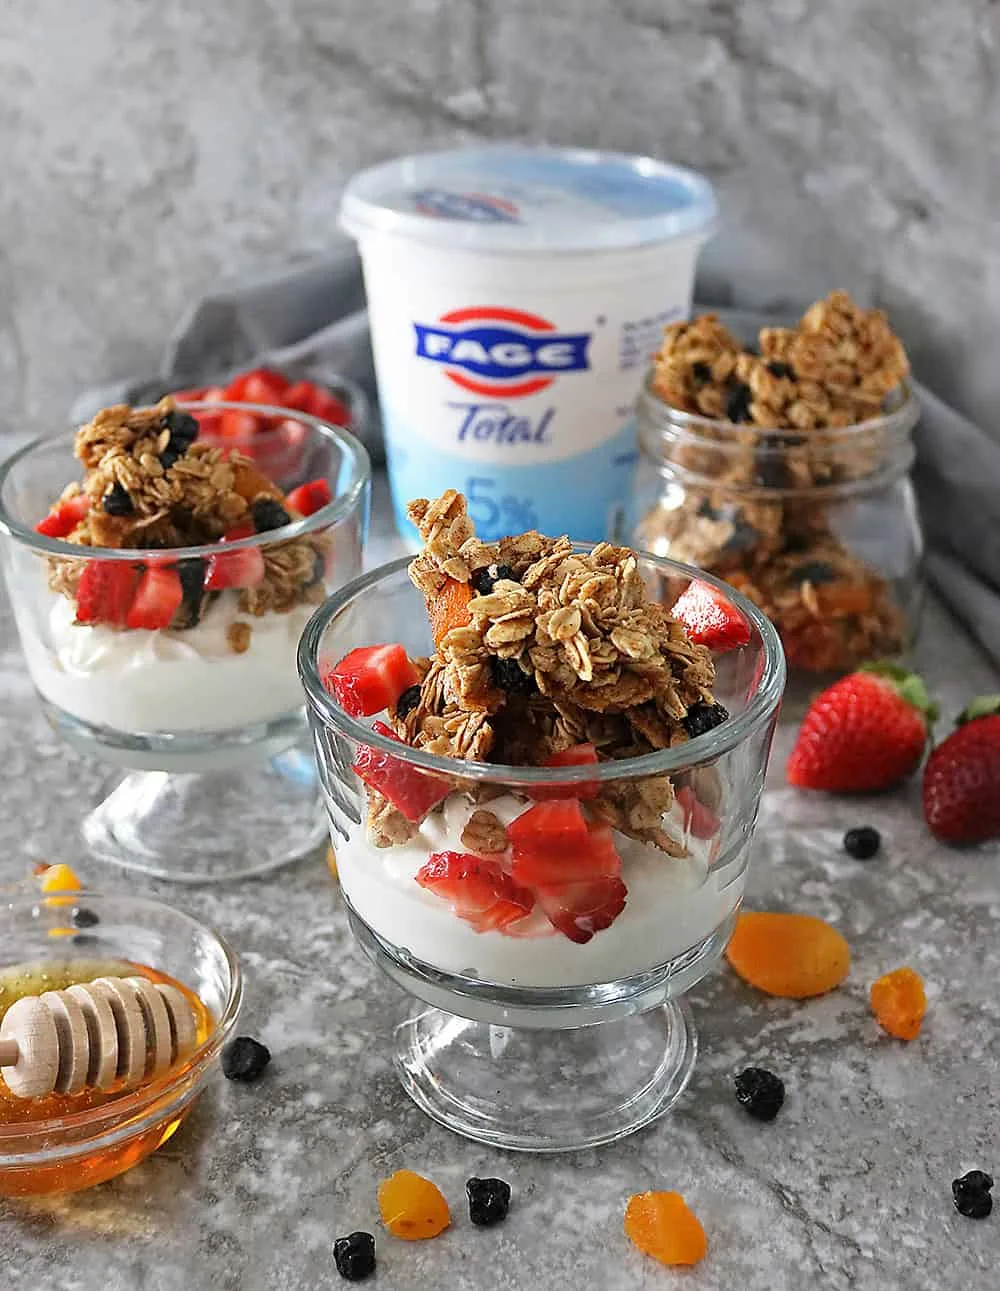 Delicious Clumpy Blueberry Apricot Granola with creamy FAGE